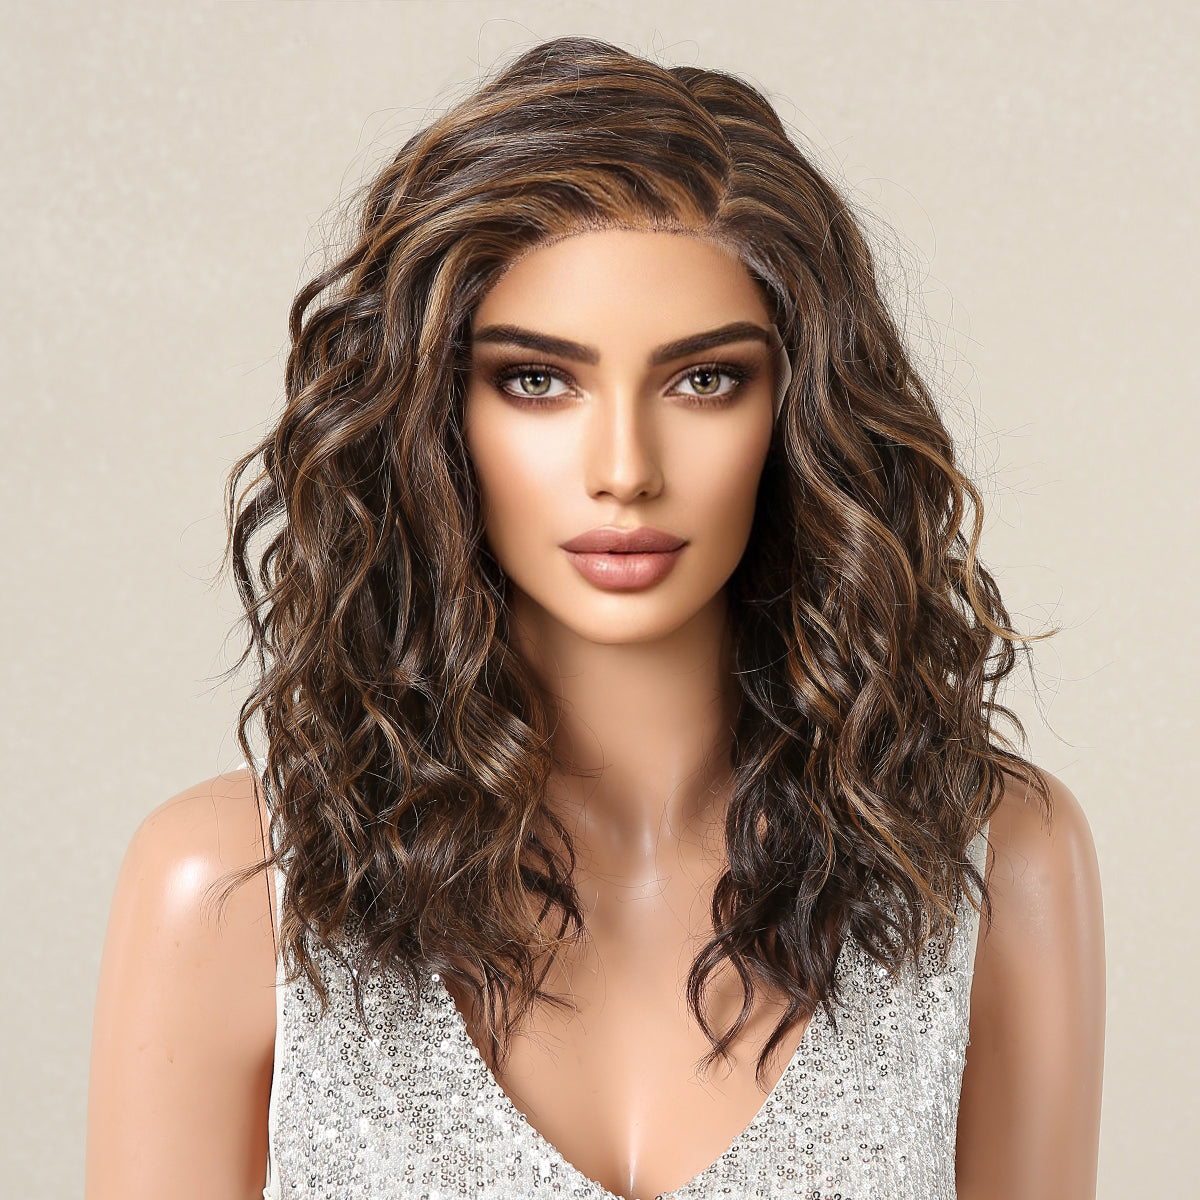 【Lace Front】【Anneliese】Loxology | Lace Front wig Long curly hair Brown with highlights